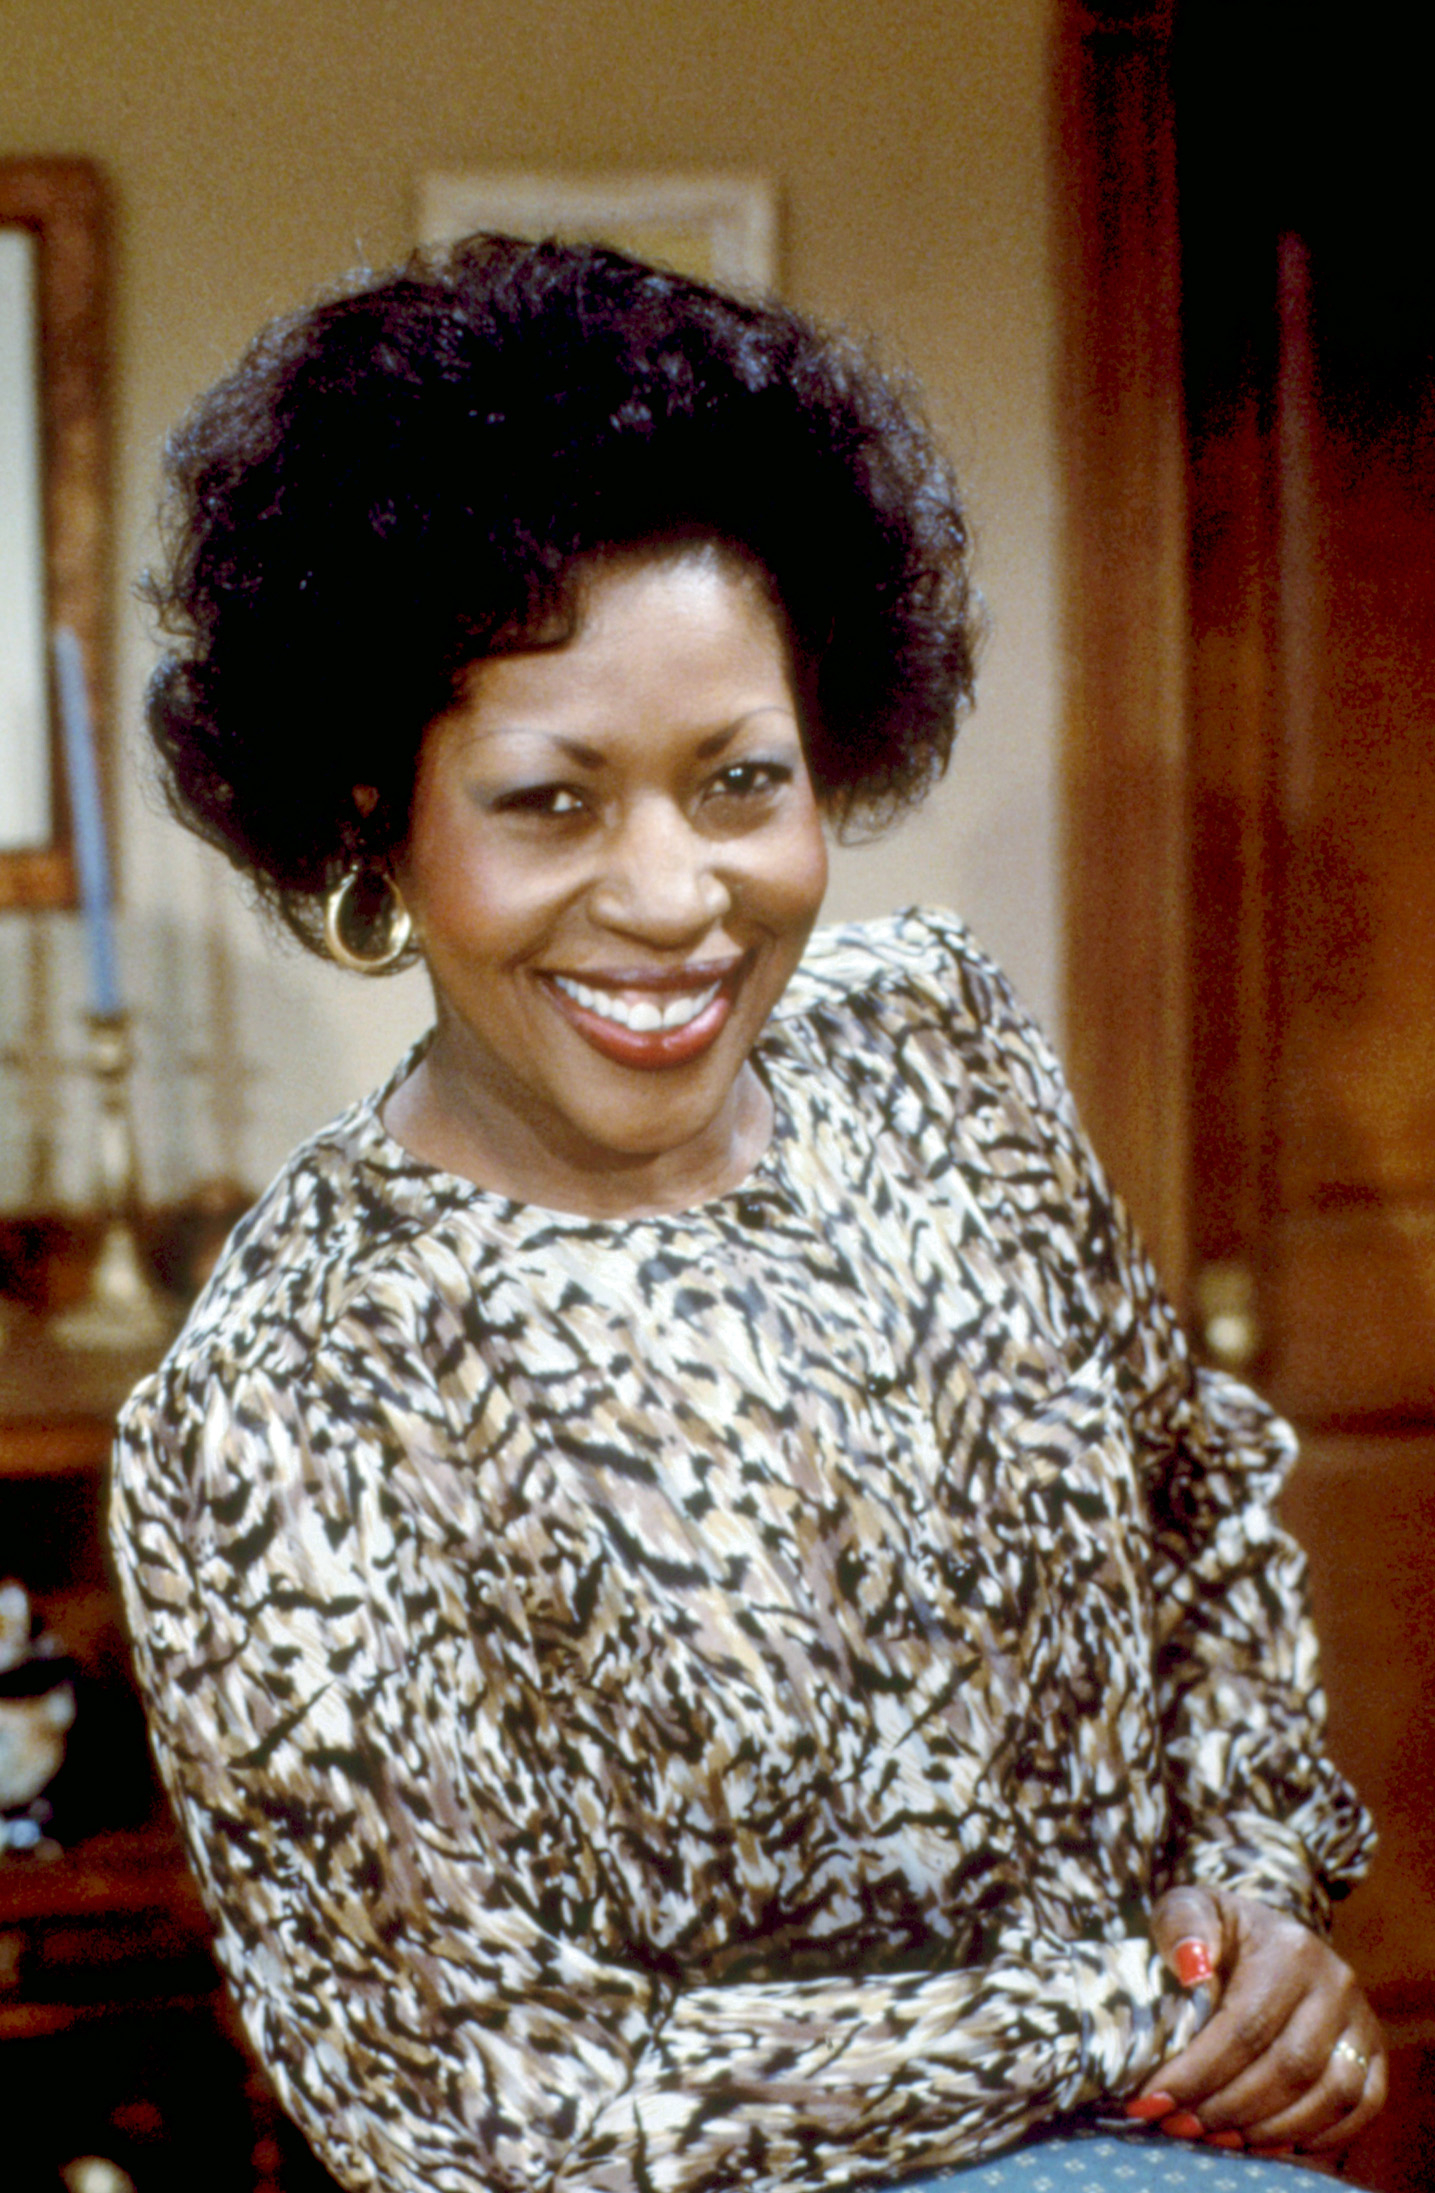 Harriette smiling while wearing a patterned blouse with puffed sleeves and hoop earrings